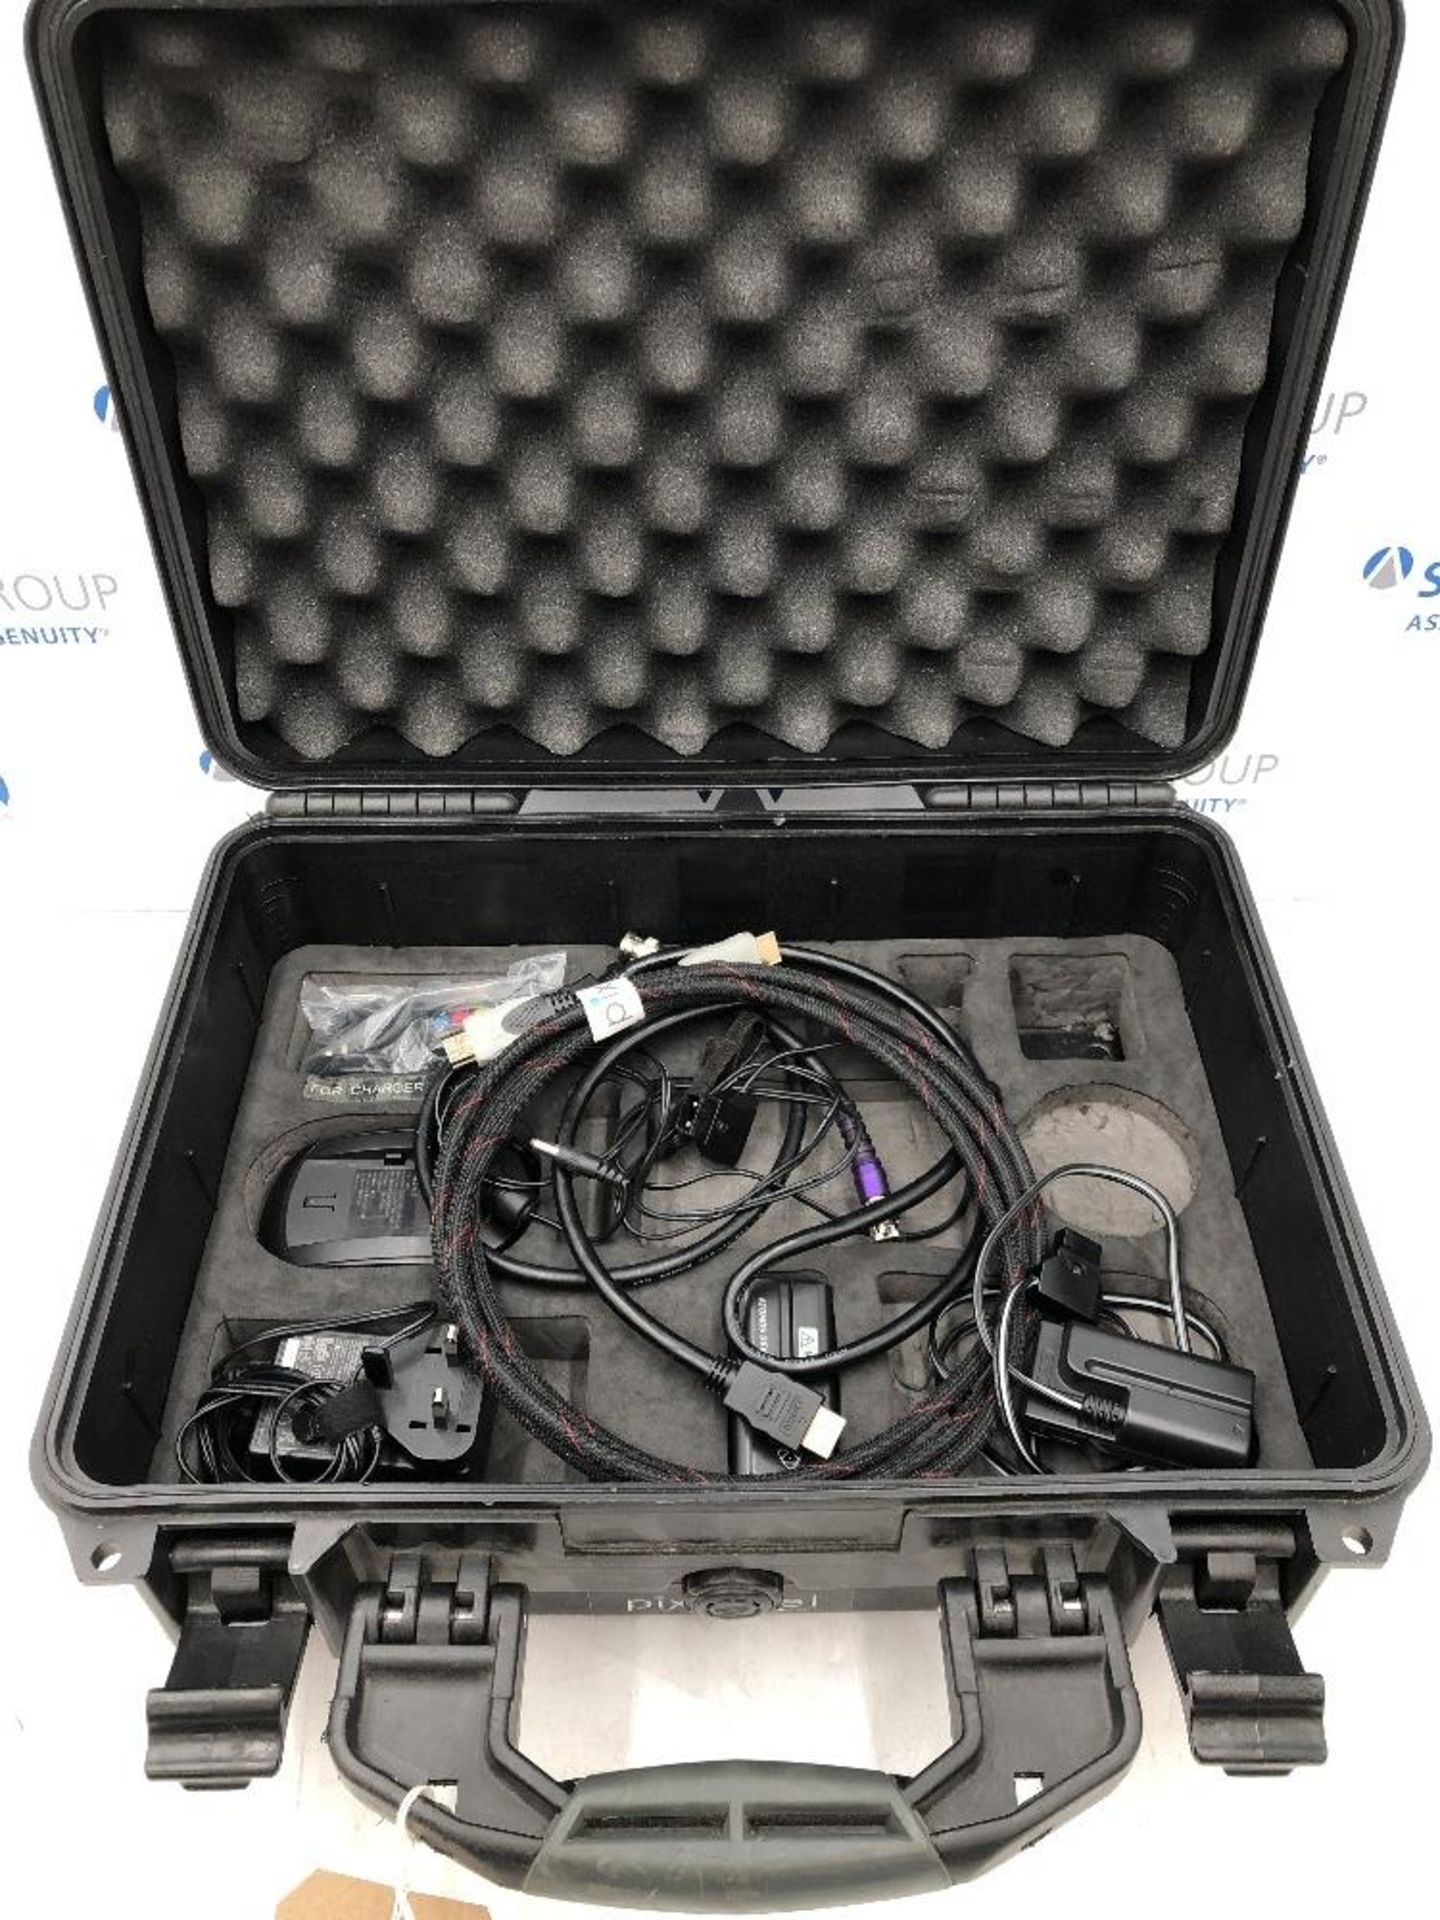 7" Atomos Shogun Recorder Unit Kit With Accessories And Carry Case - Image 2 of 6